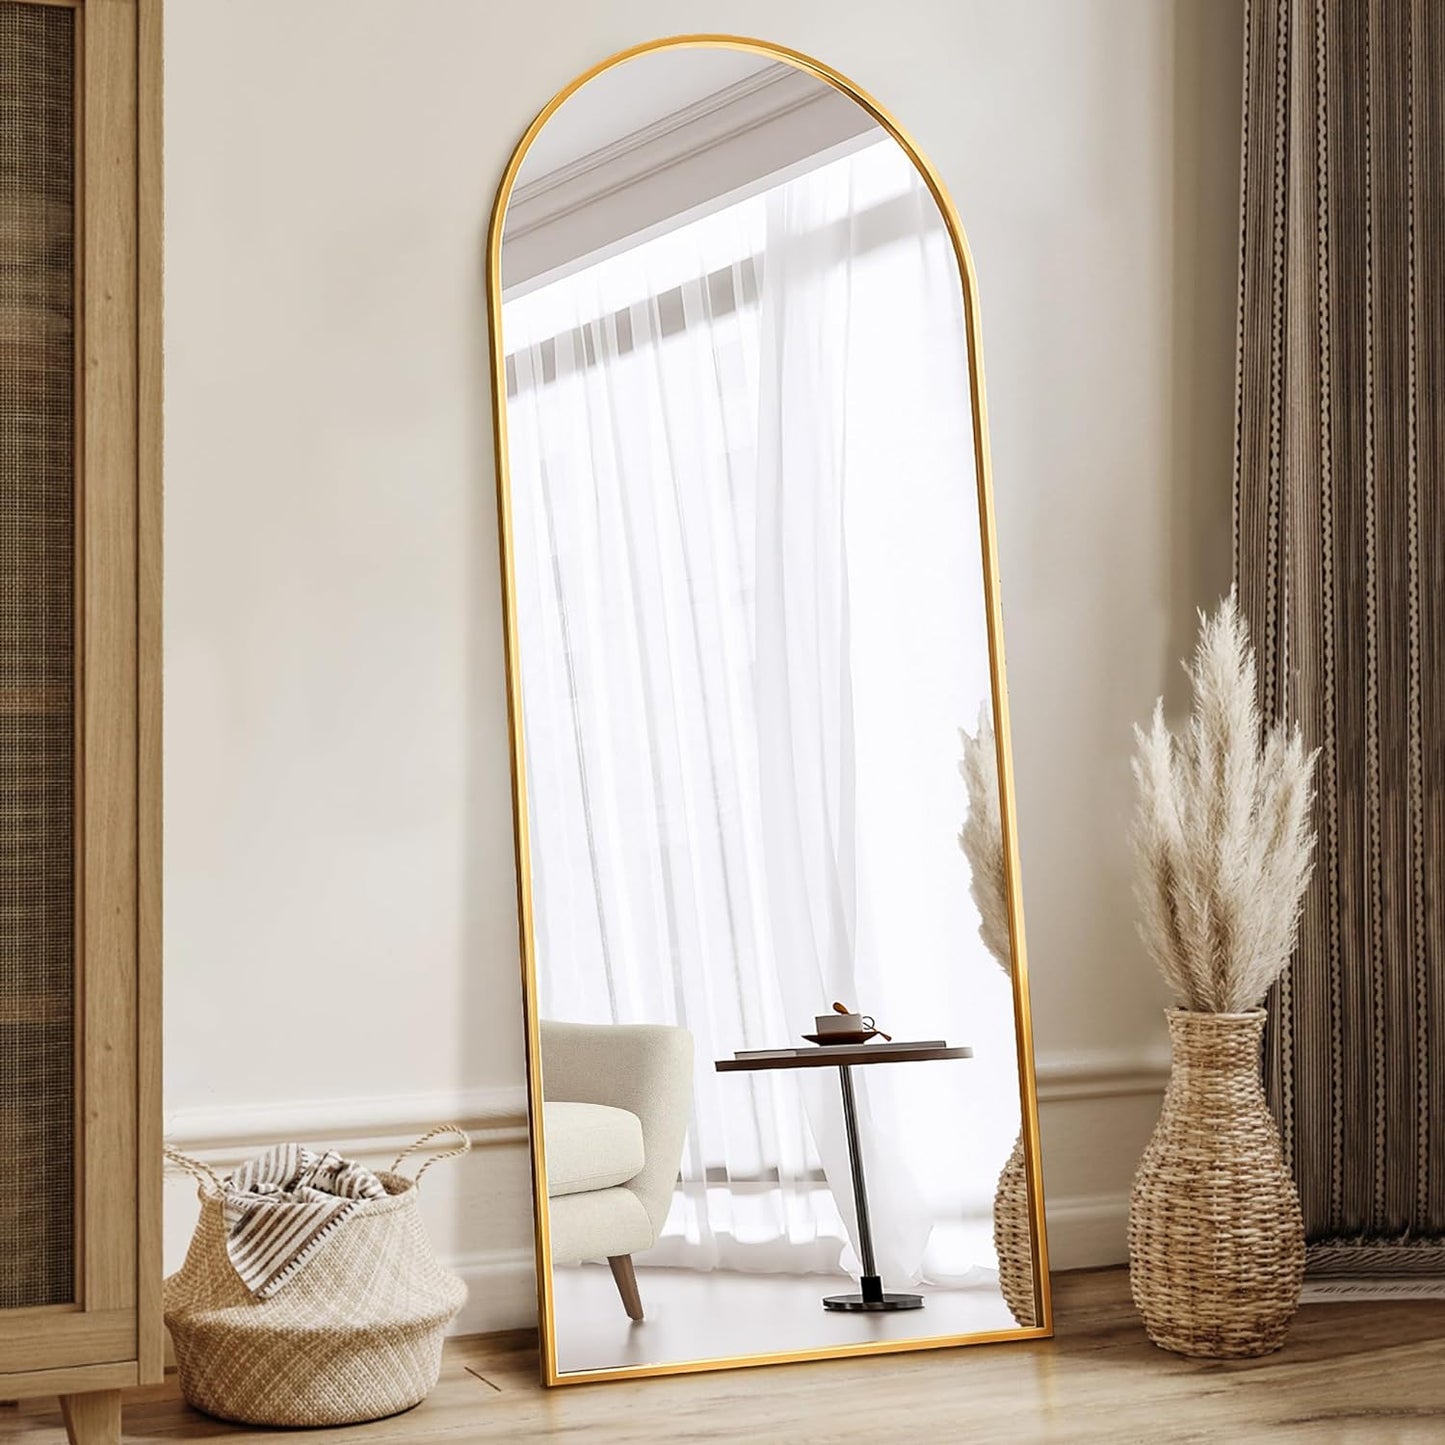 Full Length Mirror, 58"X18" Floor Mirror Freestanding, Floor Standing Mirror Full Body Mirror with Stand for Bedroom, Hanging Mounted Mirror for Living Room Cloakroom, Gold